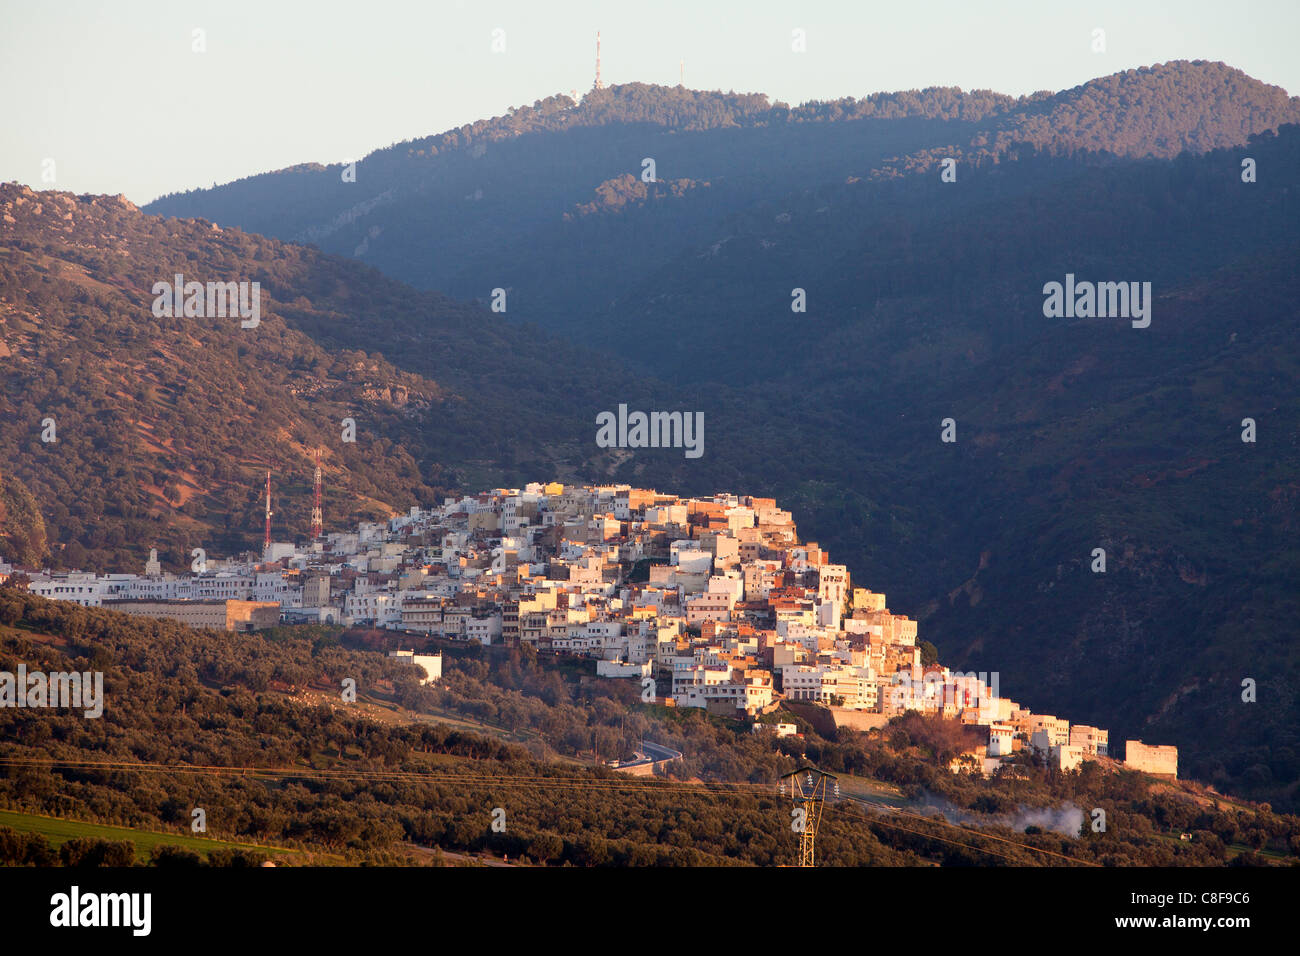 Morocco, North Africa, Africa, Moulay Idriss, village, mountains Stock Photo